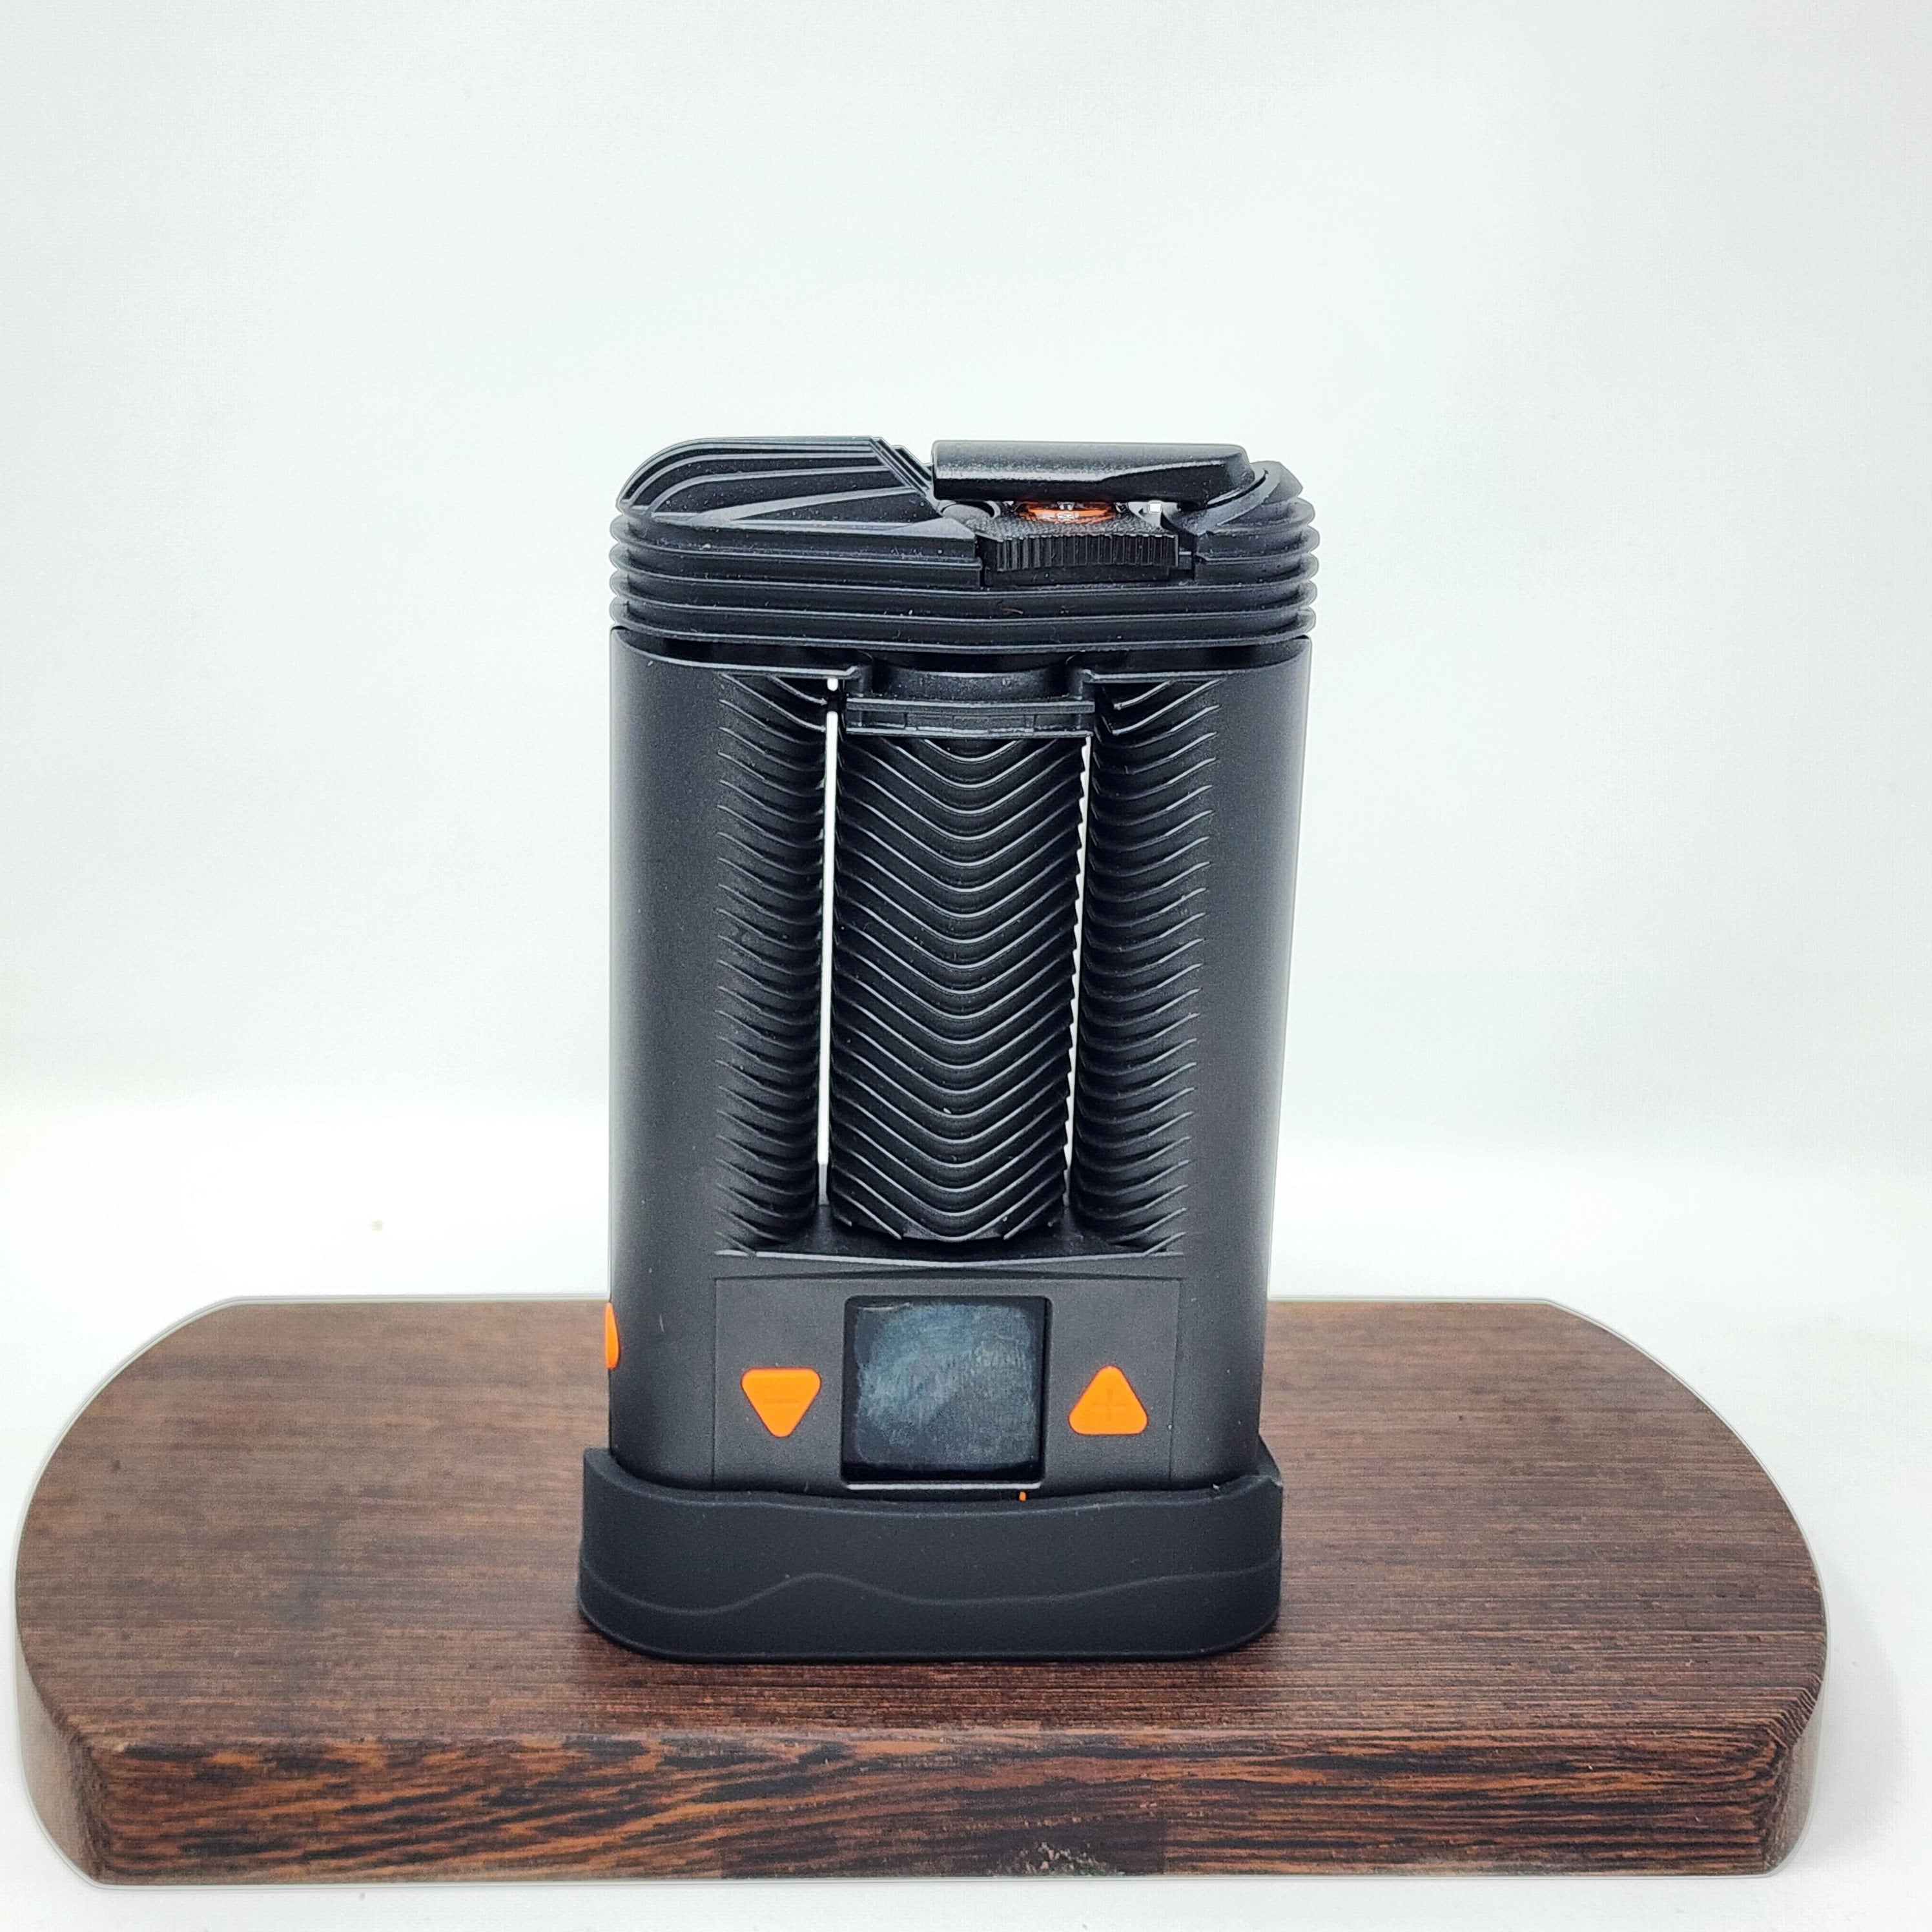 Peak Pro 3D XL Chamber by Puffco